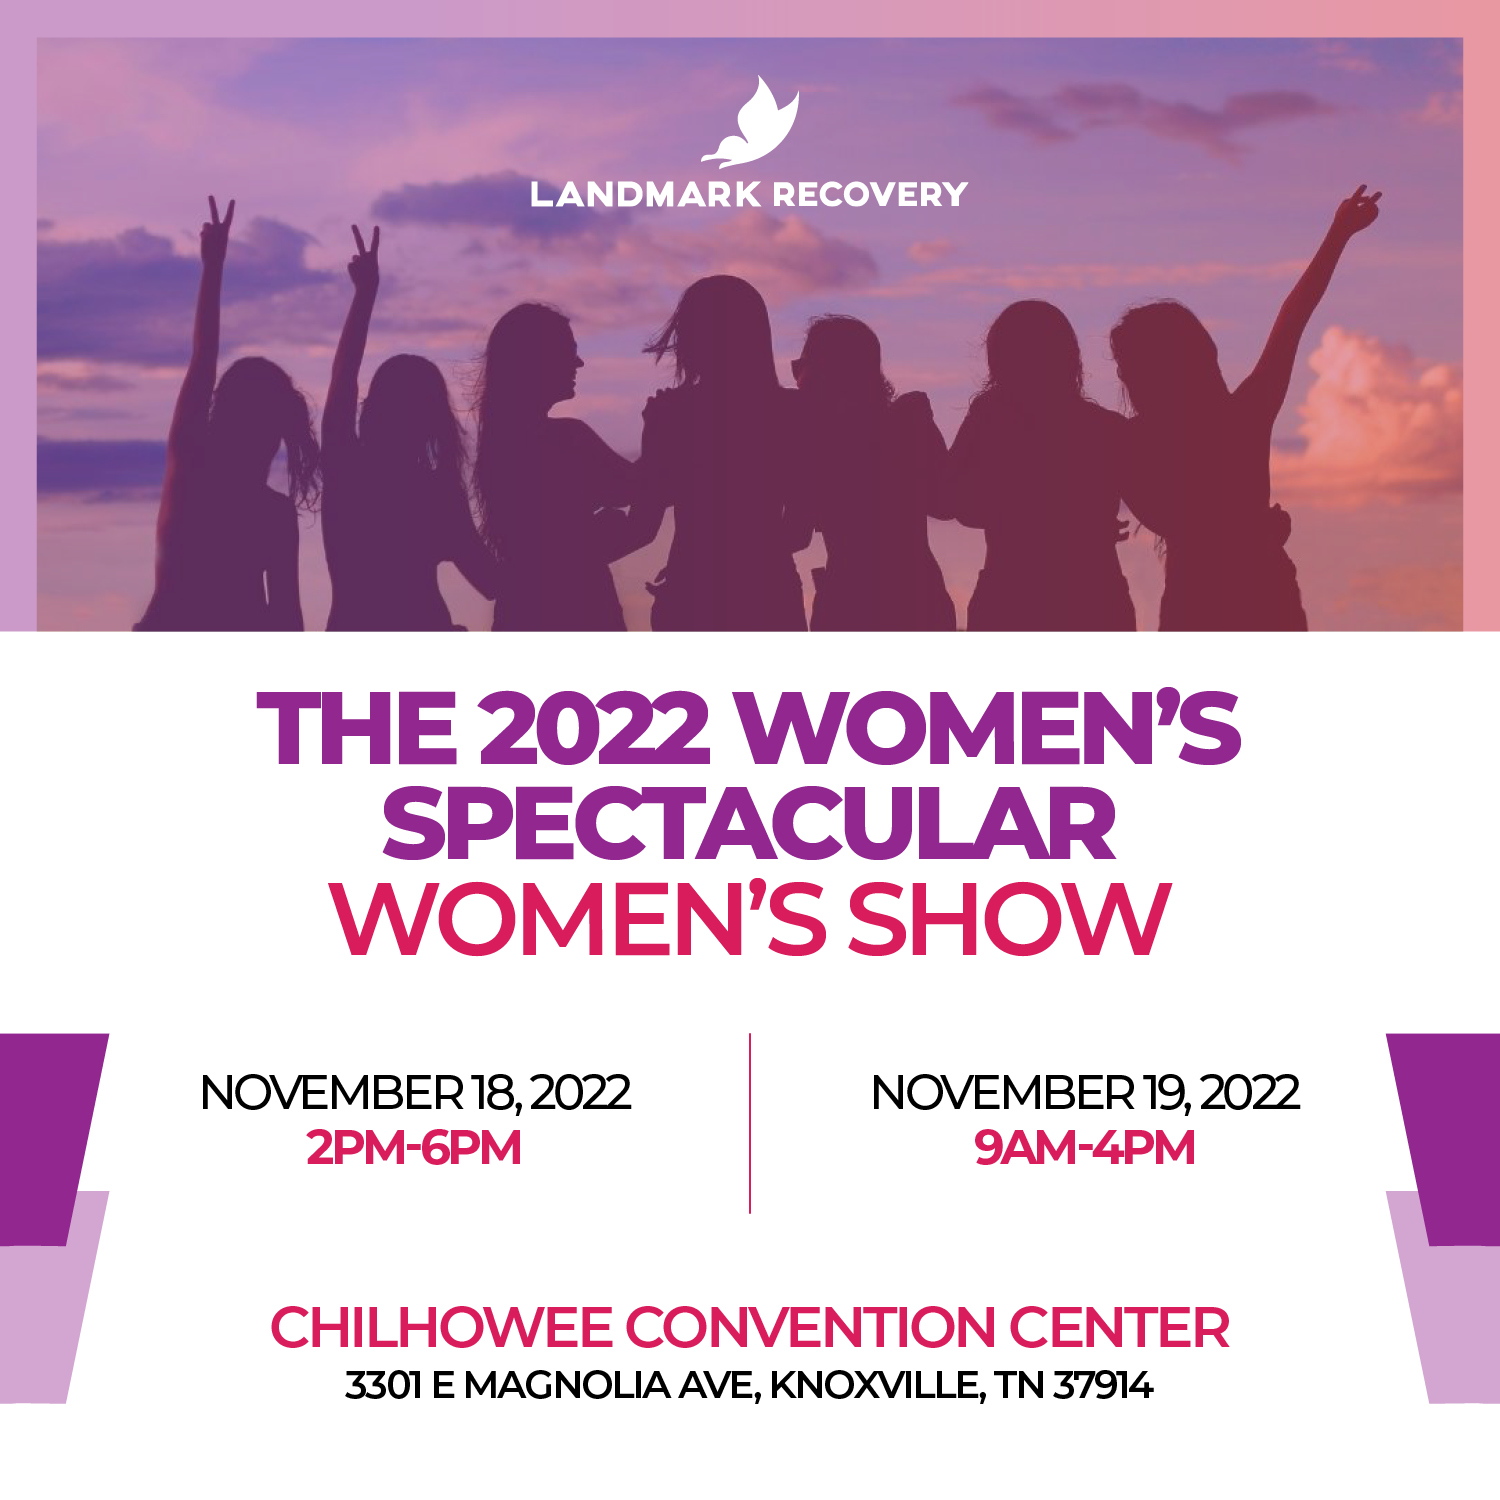 The 2022 Women's Spectacular Women's Show at the Chilhowee Convention Center